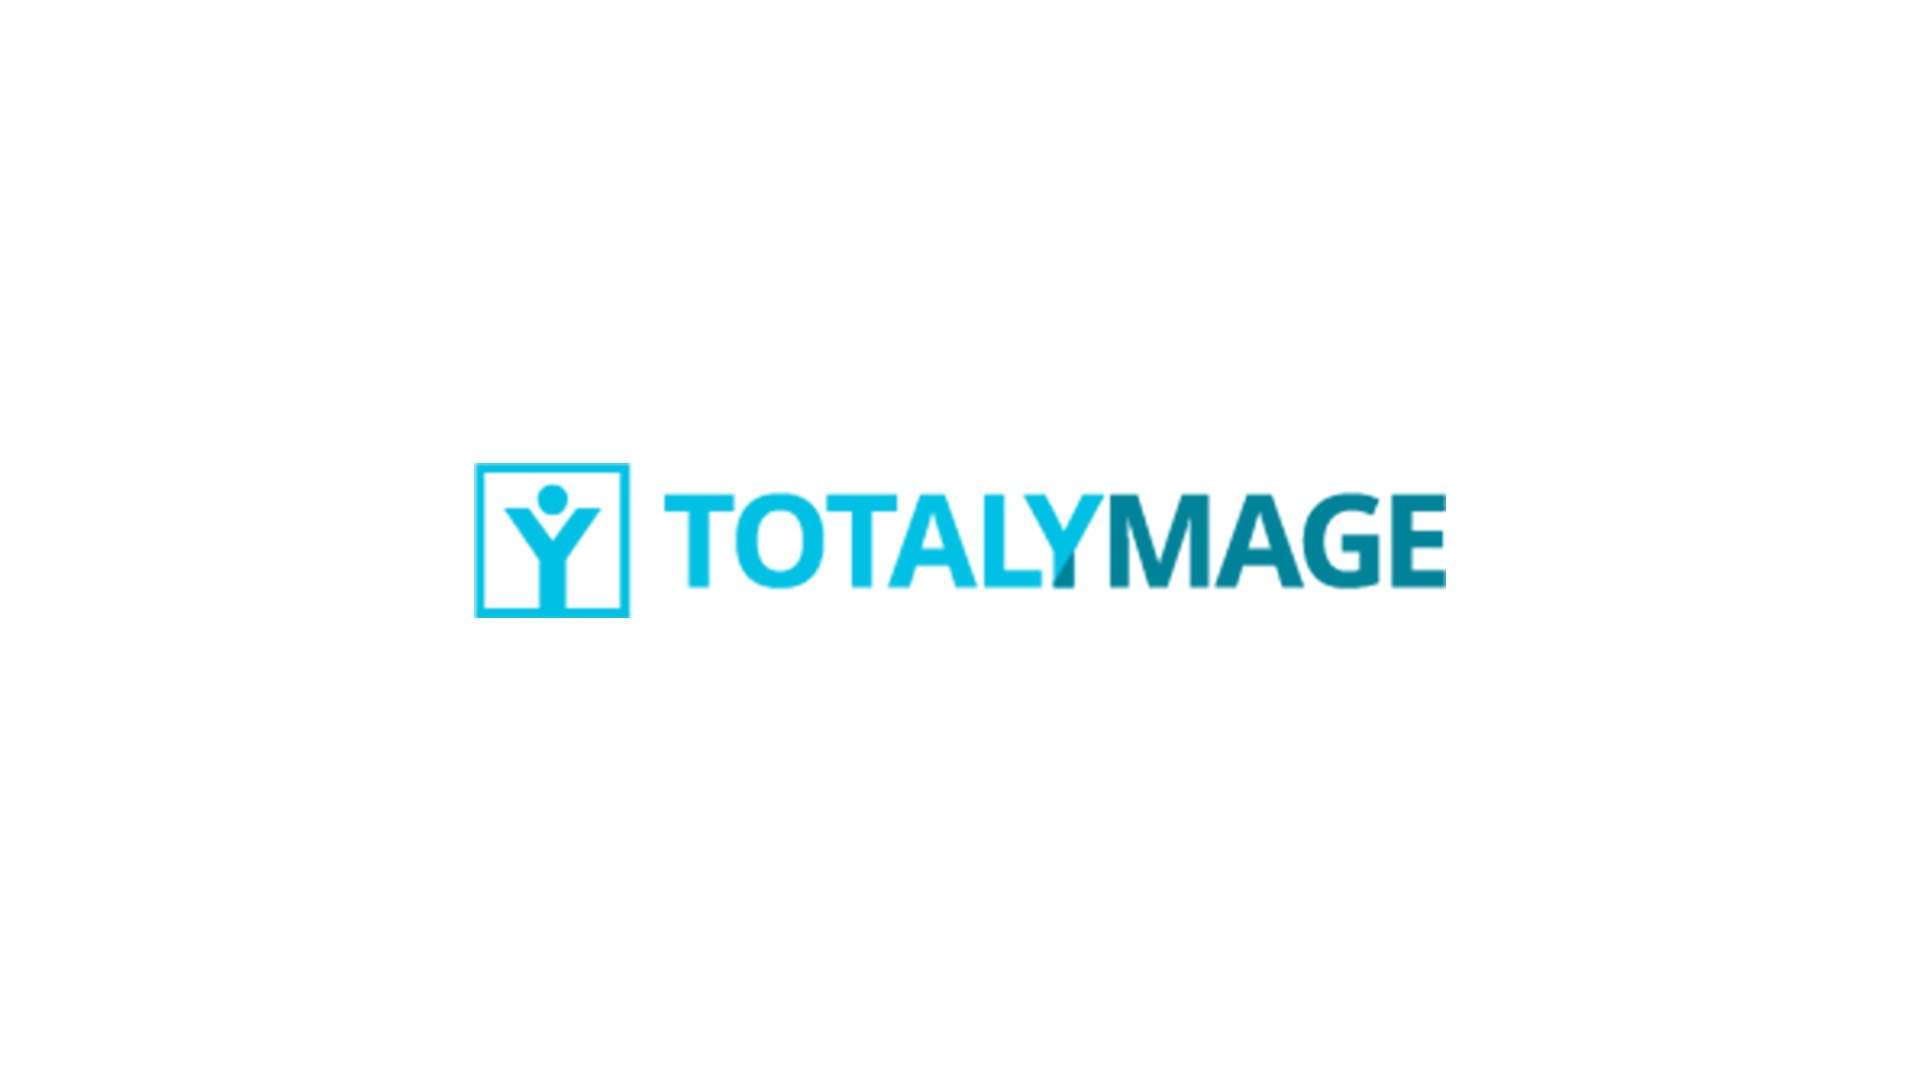 TotalYmage